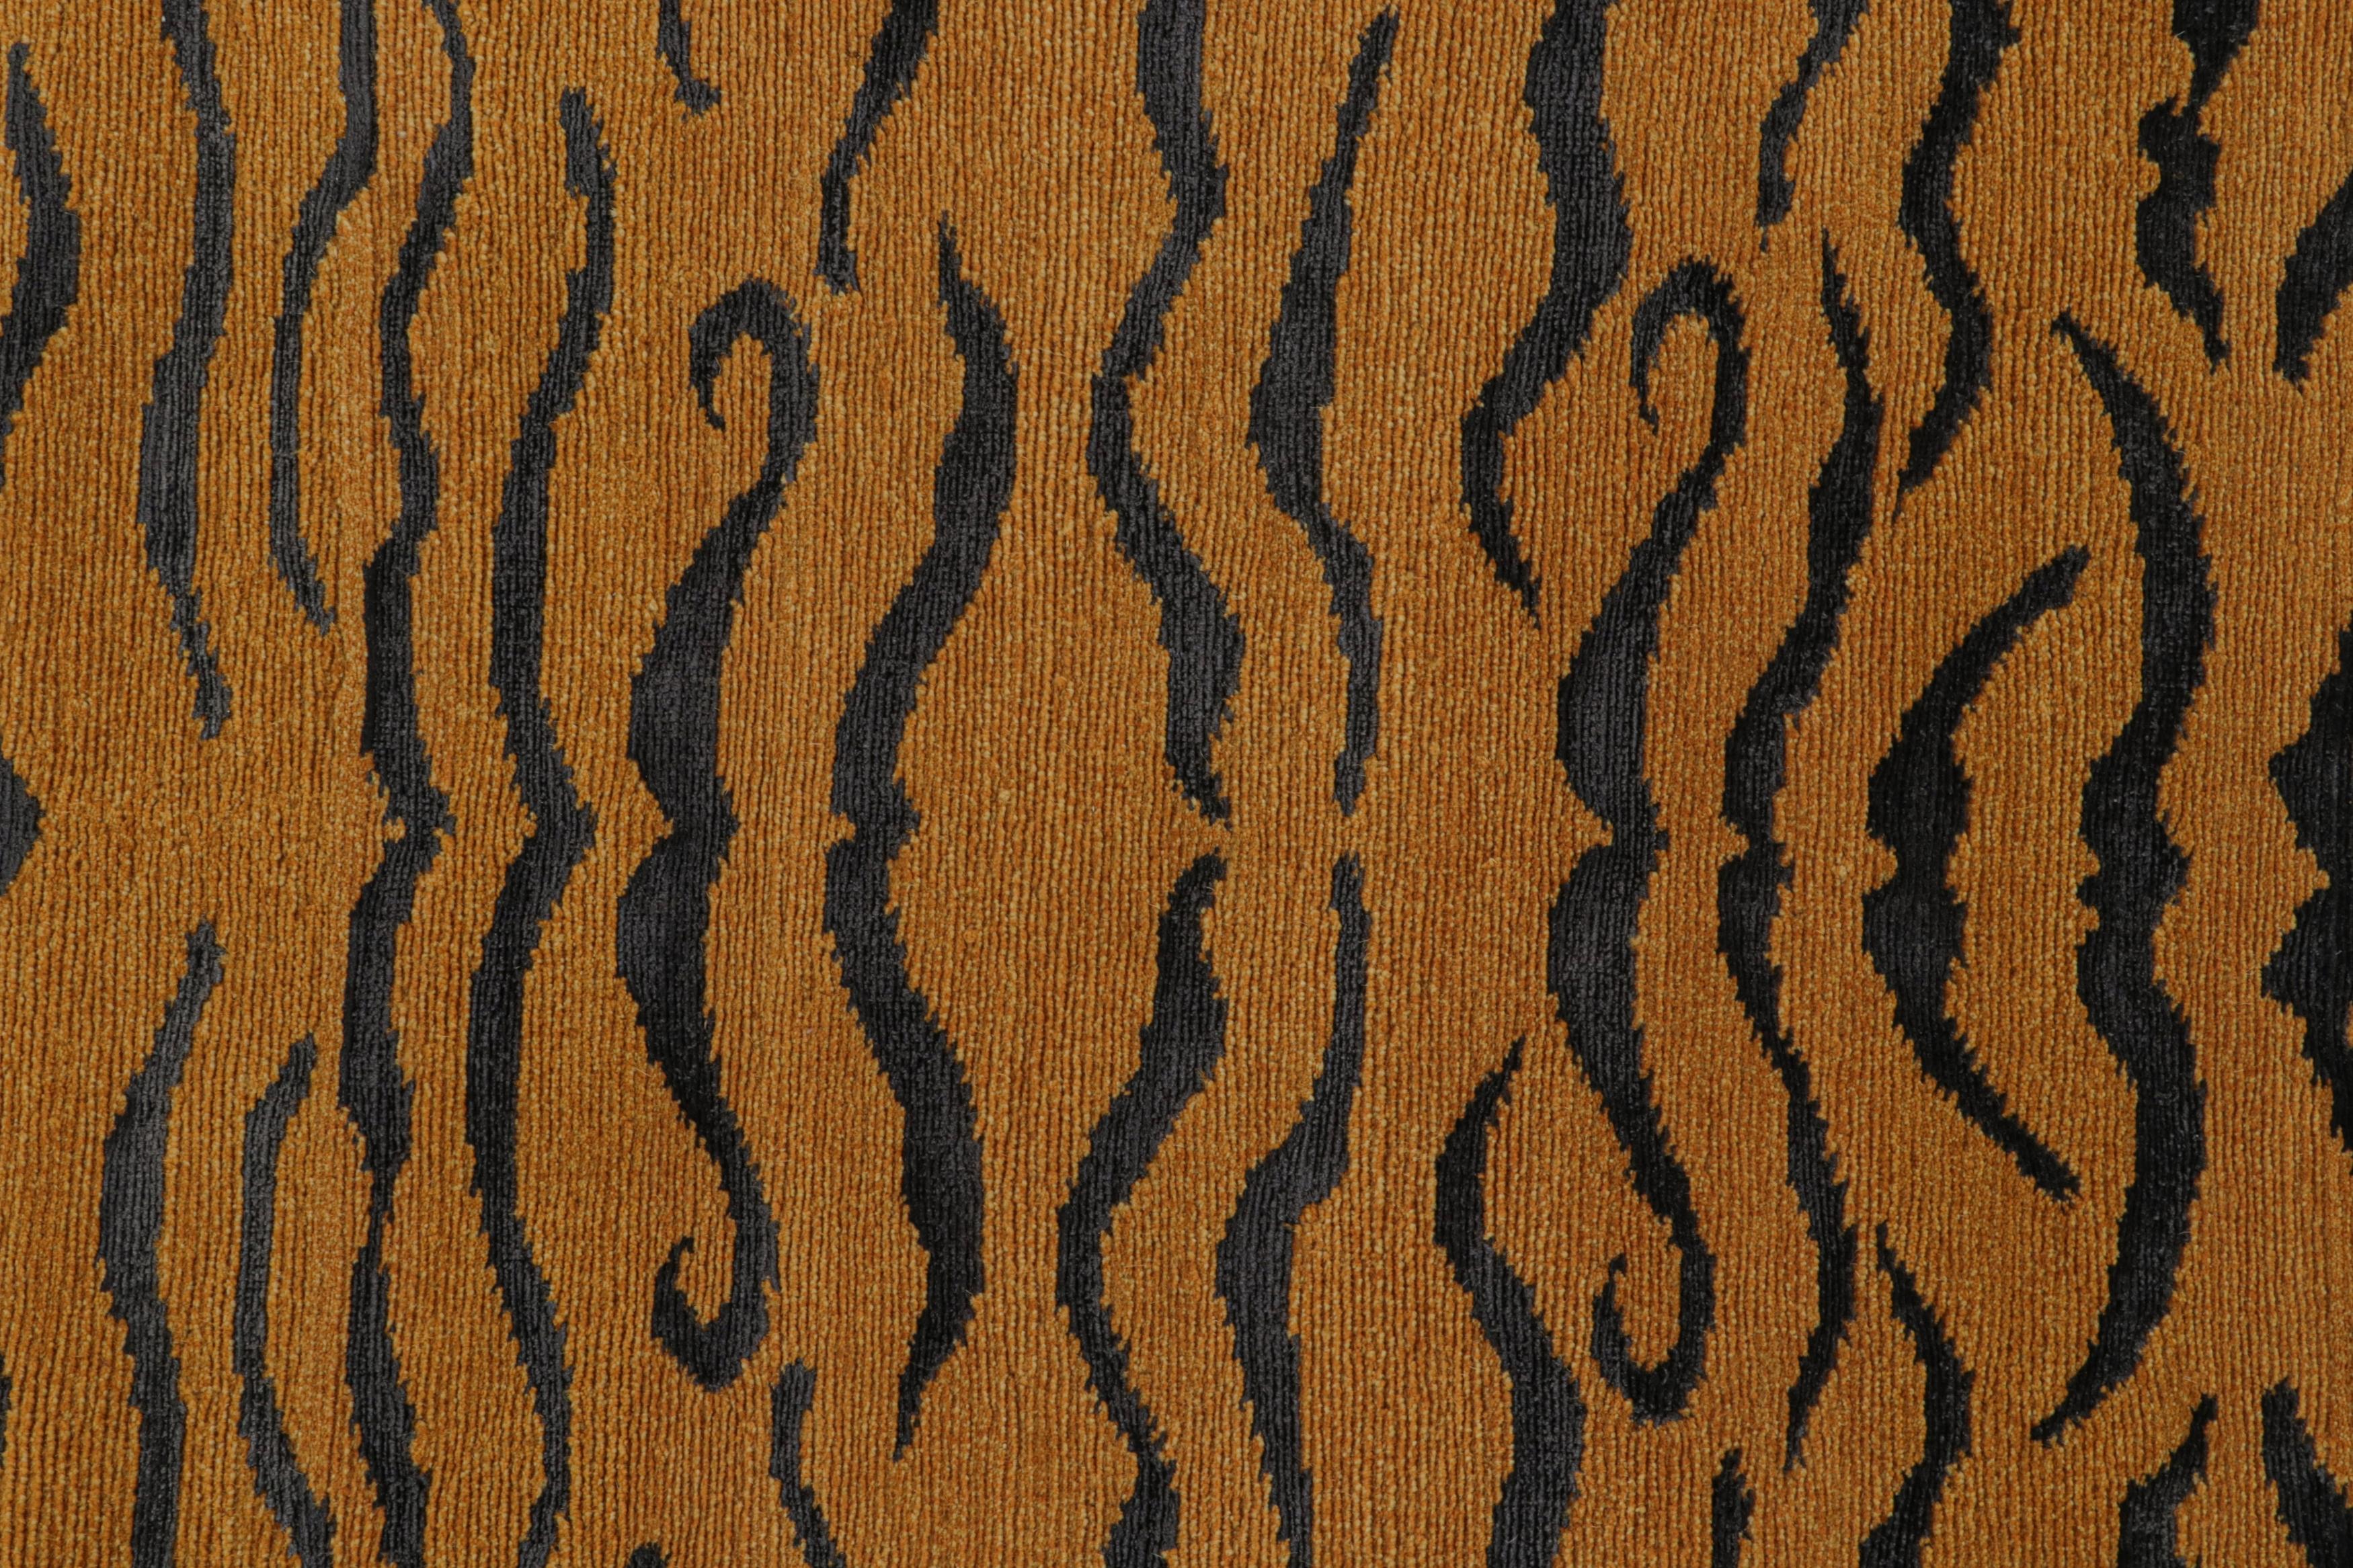 Contemporary Rug & Kilim’s Tiger-Skin Rug in White with Gold & Black Pictorial